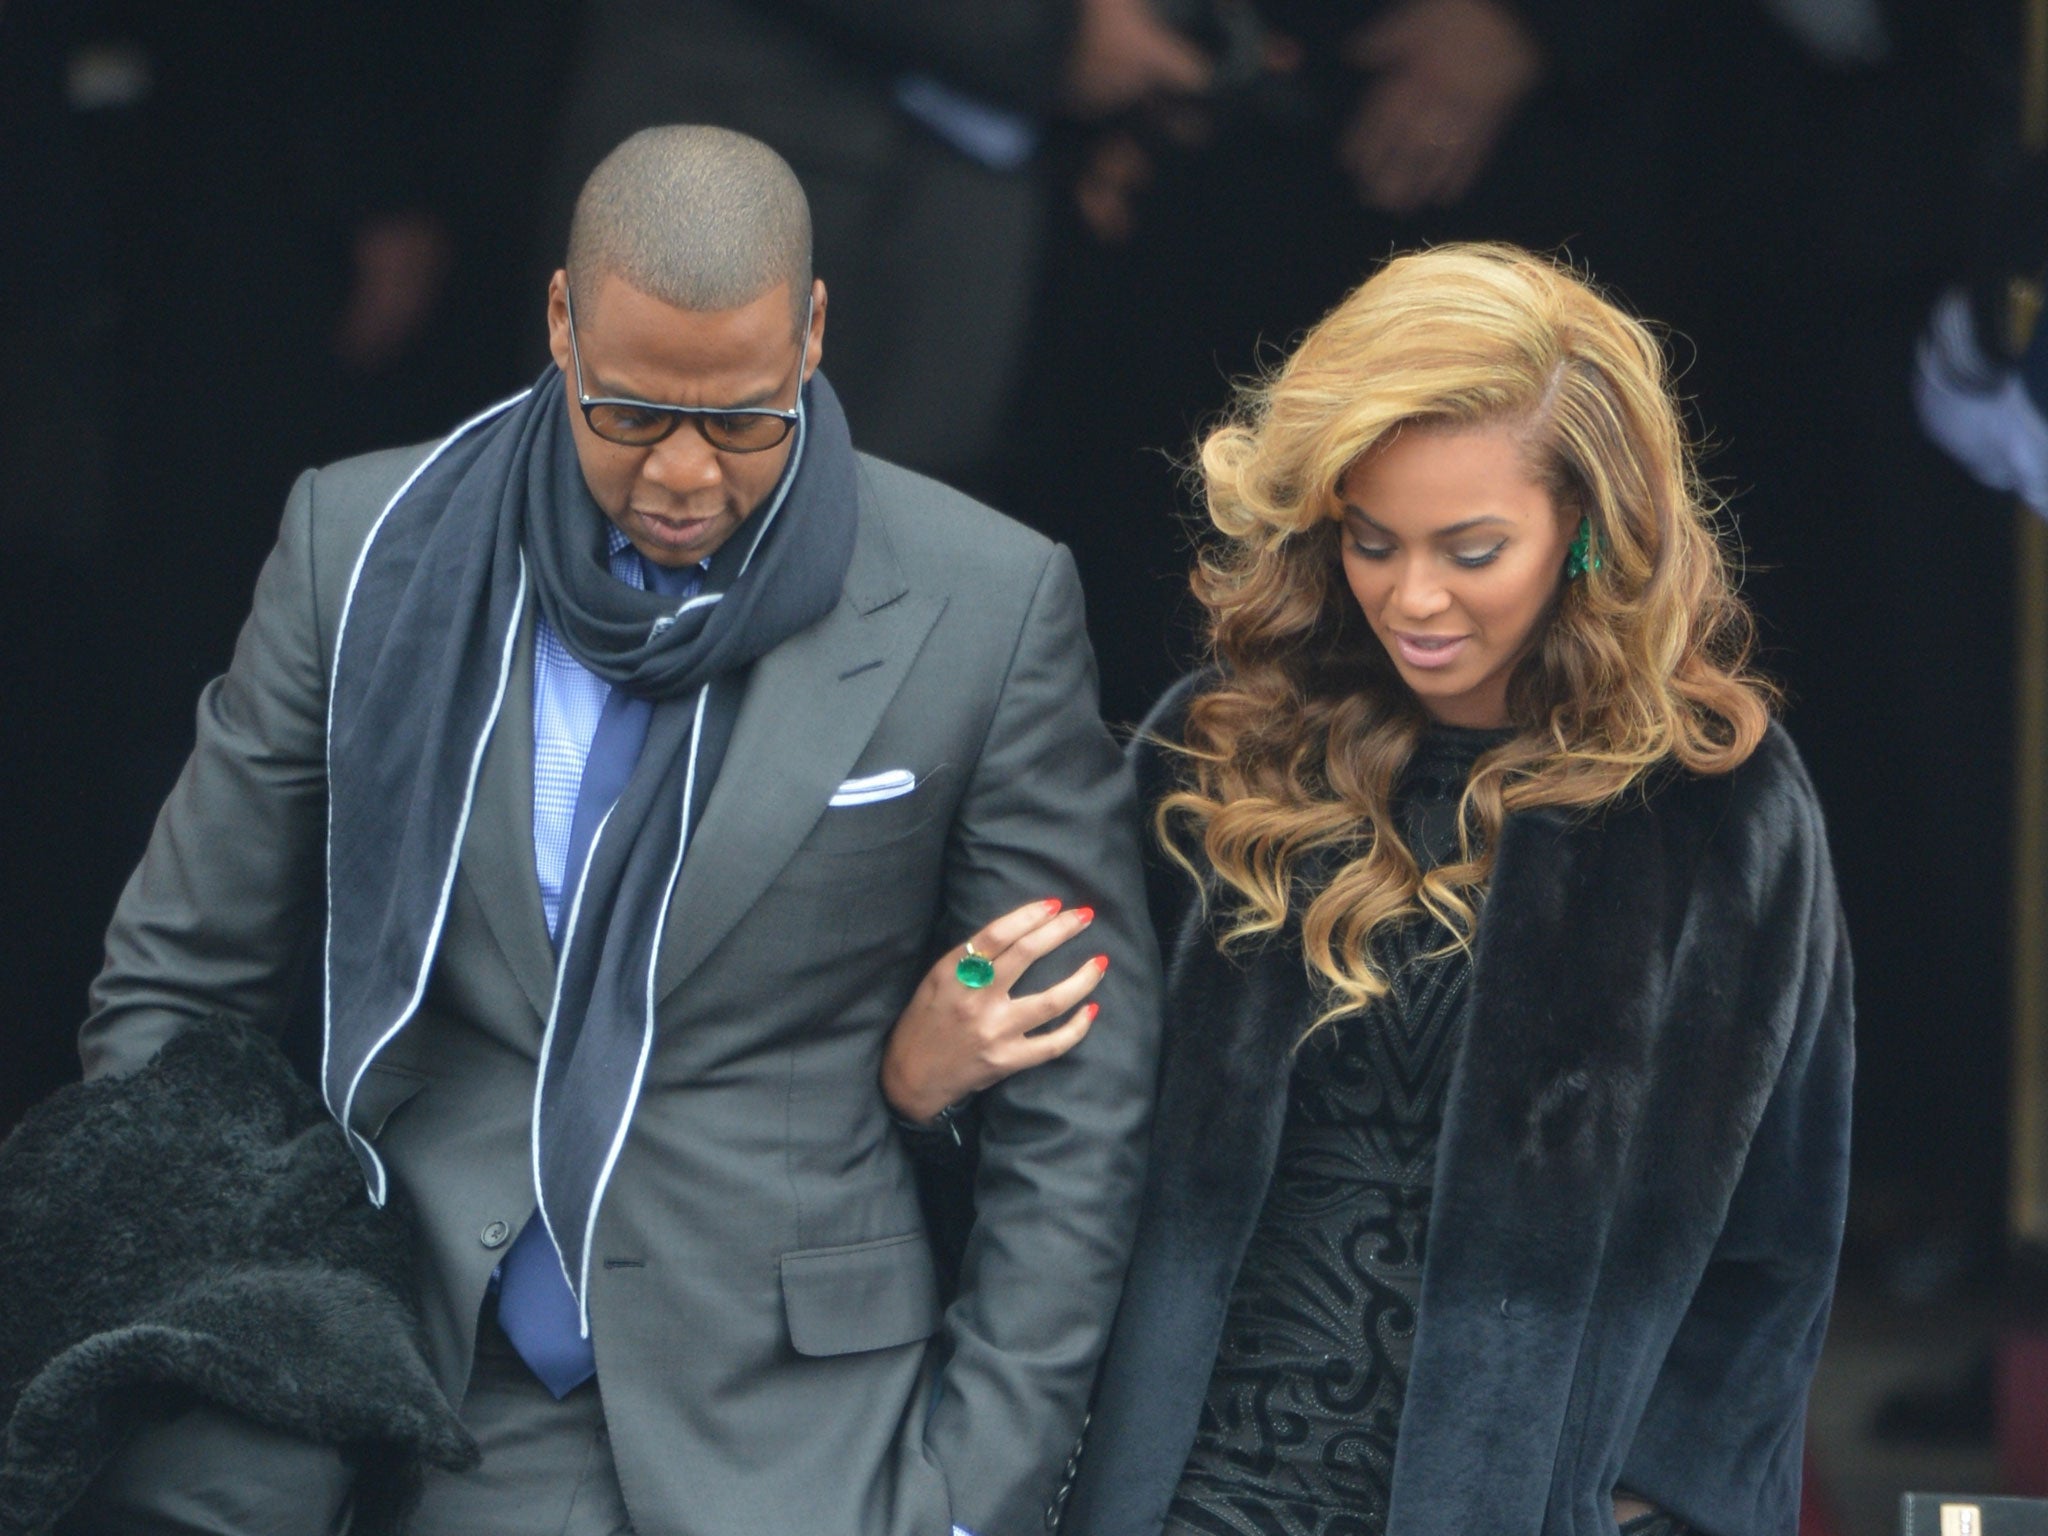 Beyoncé and Jay-Z publicly reneged on their vegan efforts in a seafood restaurant